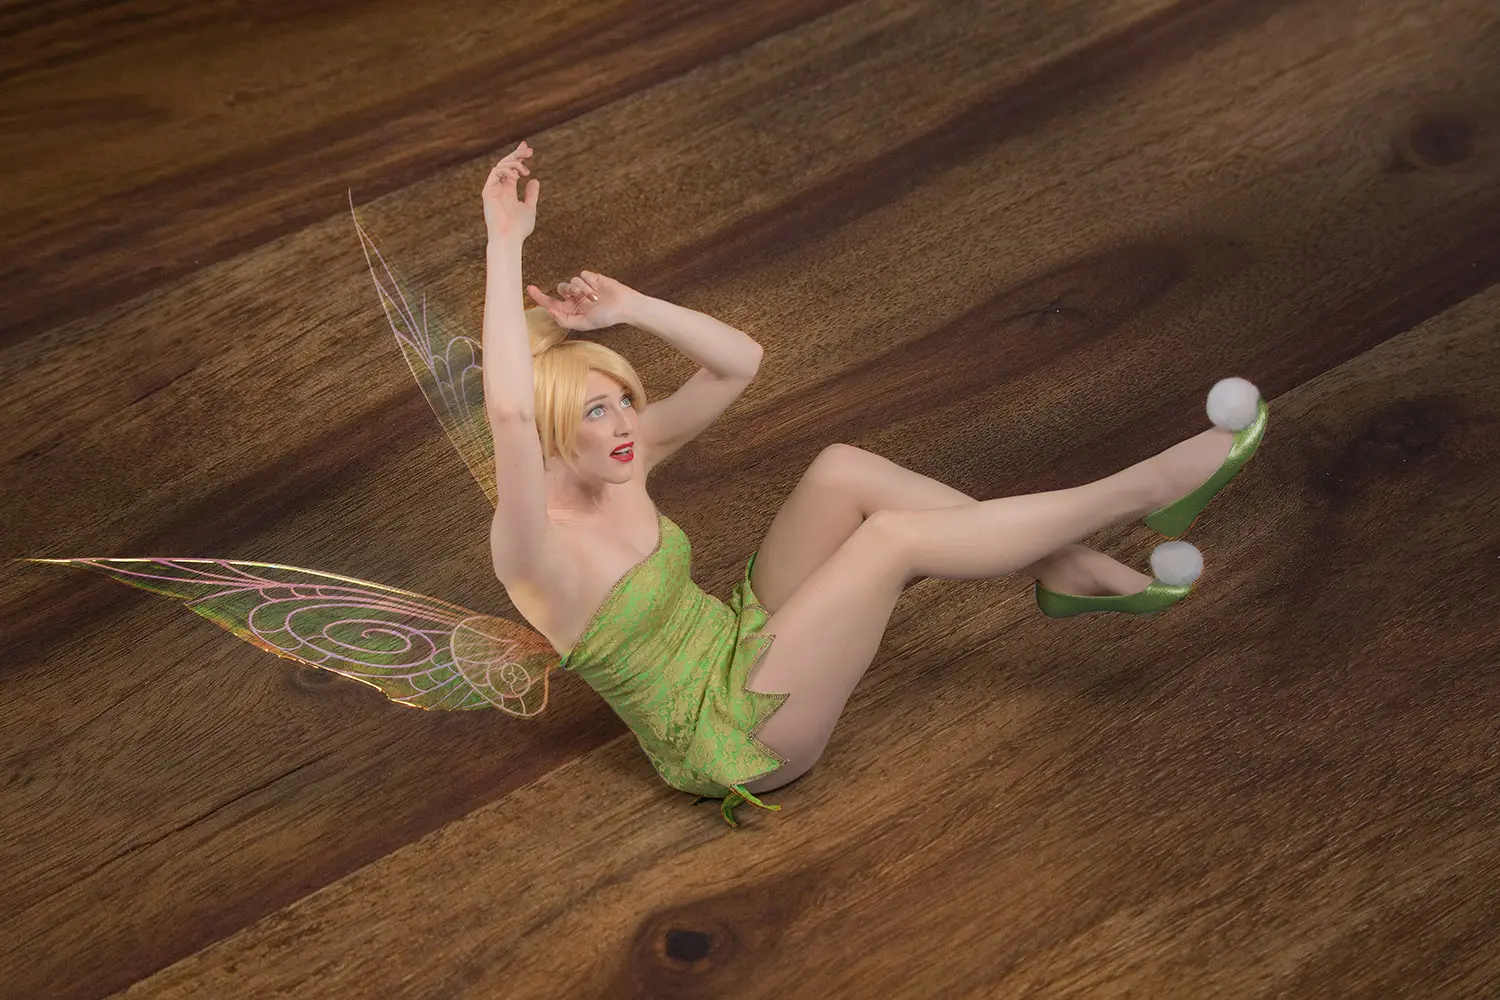 Cosplay Tinkerbell Fairy falling backwards onto table with giant's shadow